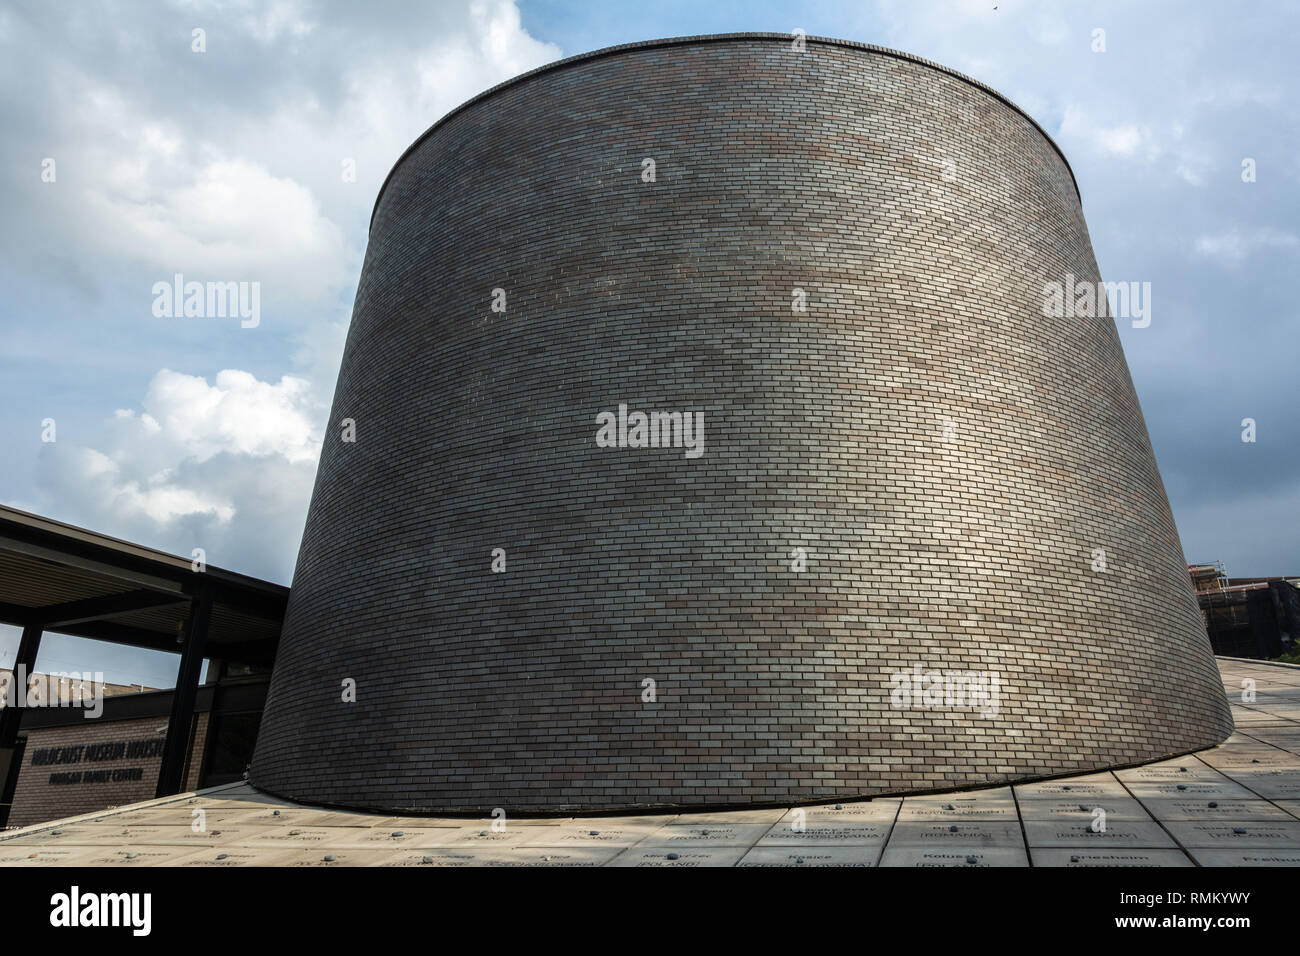 Houston, Texas, United States of America - December 27, 2016. Exterior view of the Holocaust Museum Houston in Houston, TX. Stock Photo